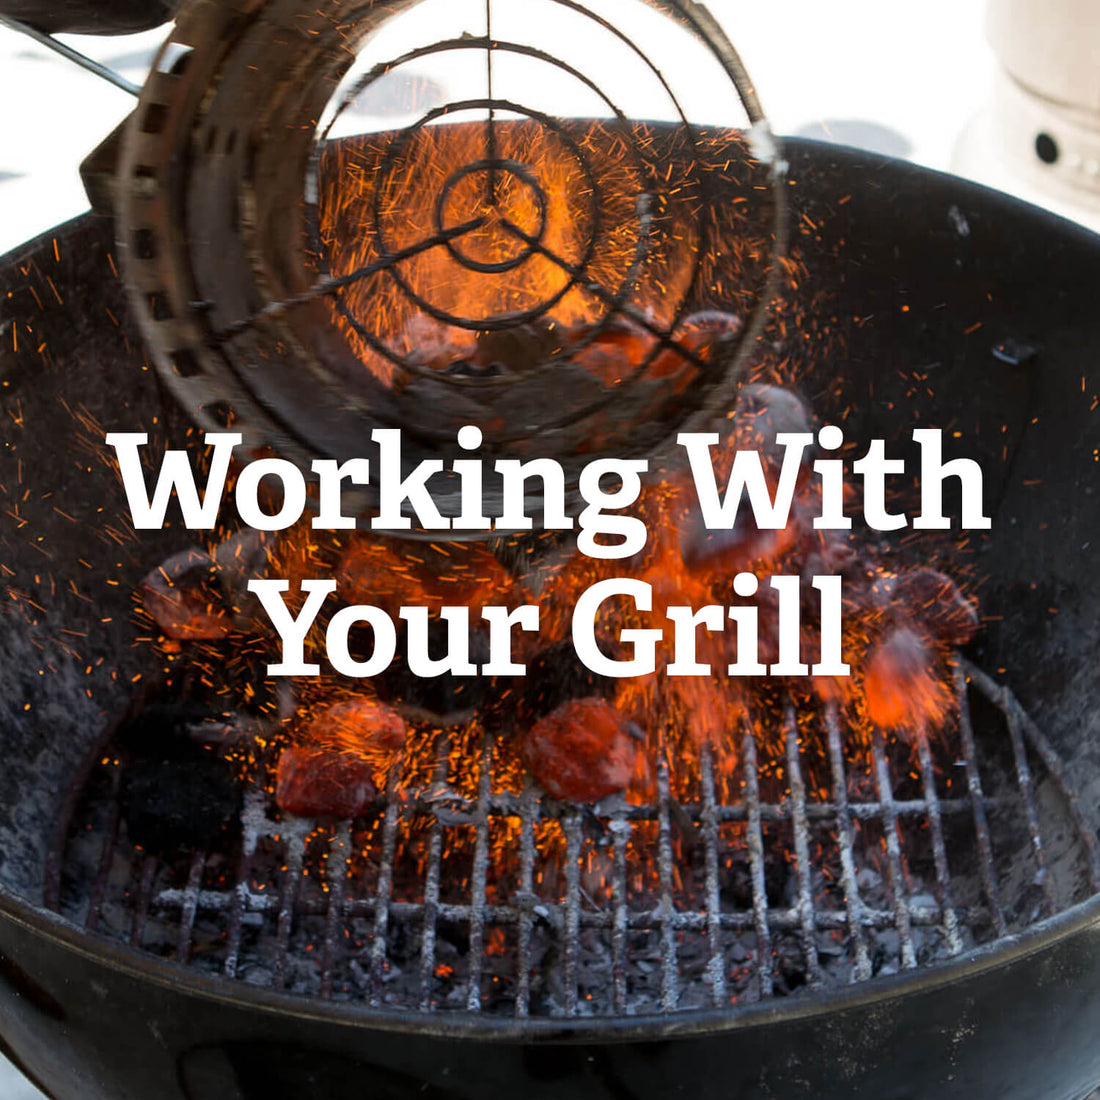 How to Pick, Prep, and Clean Your Grill